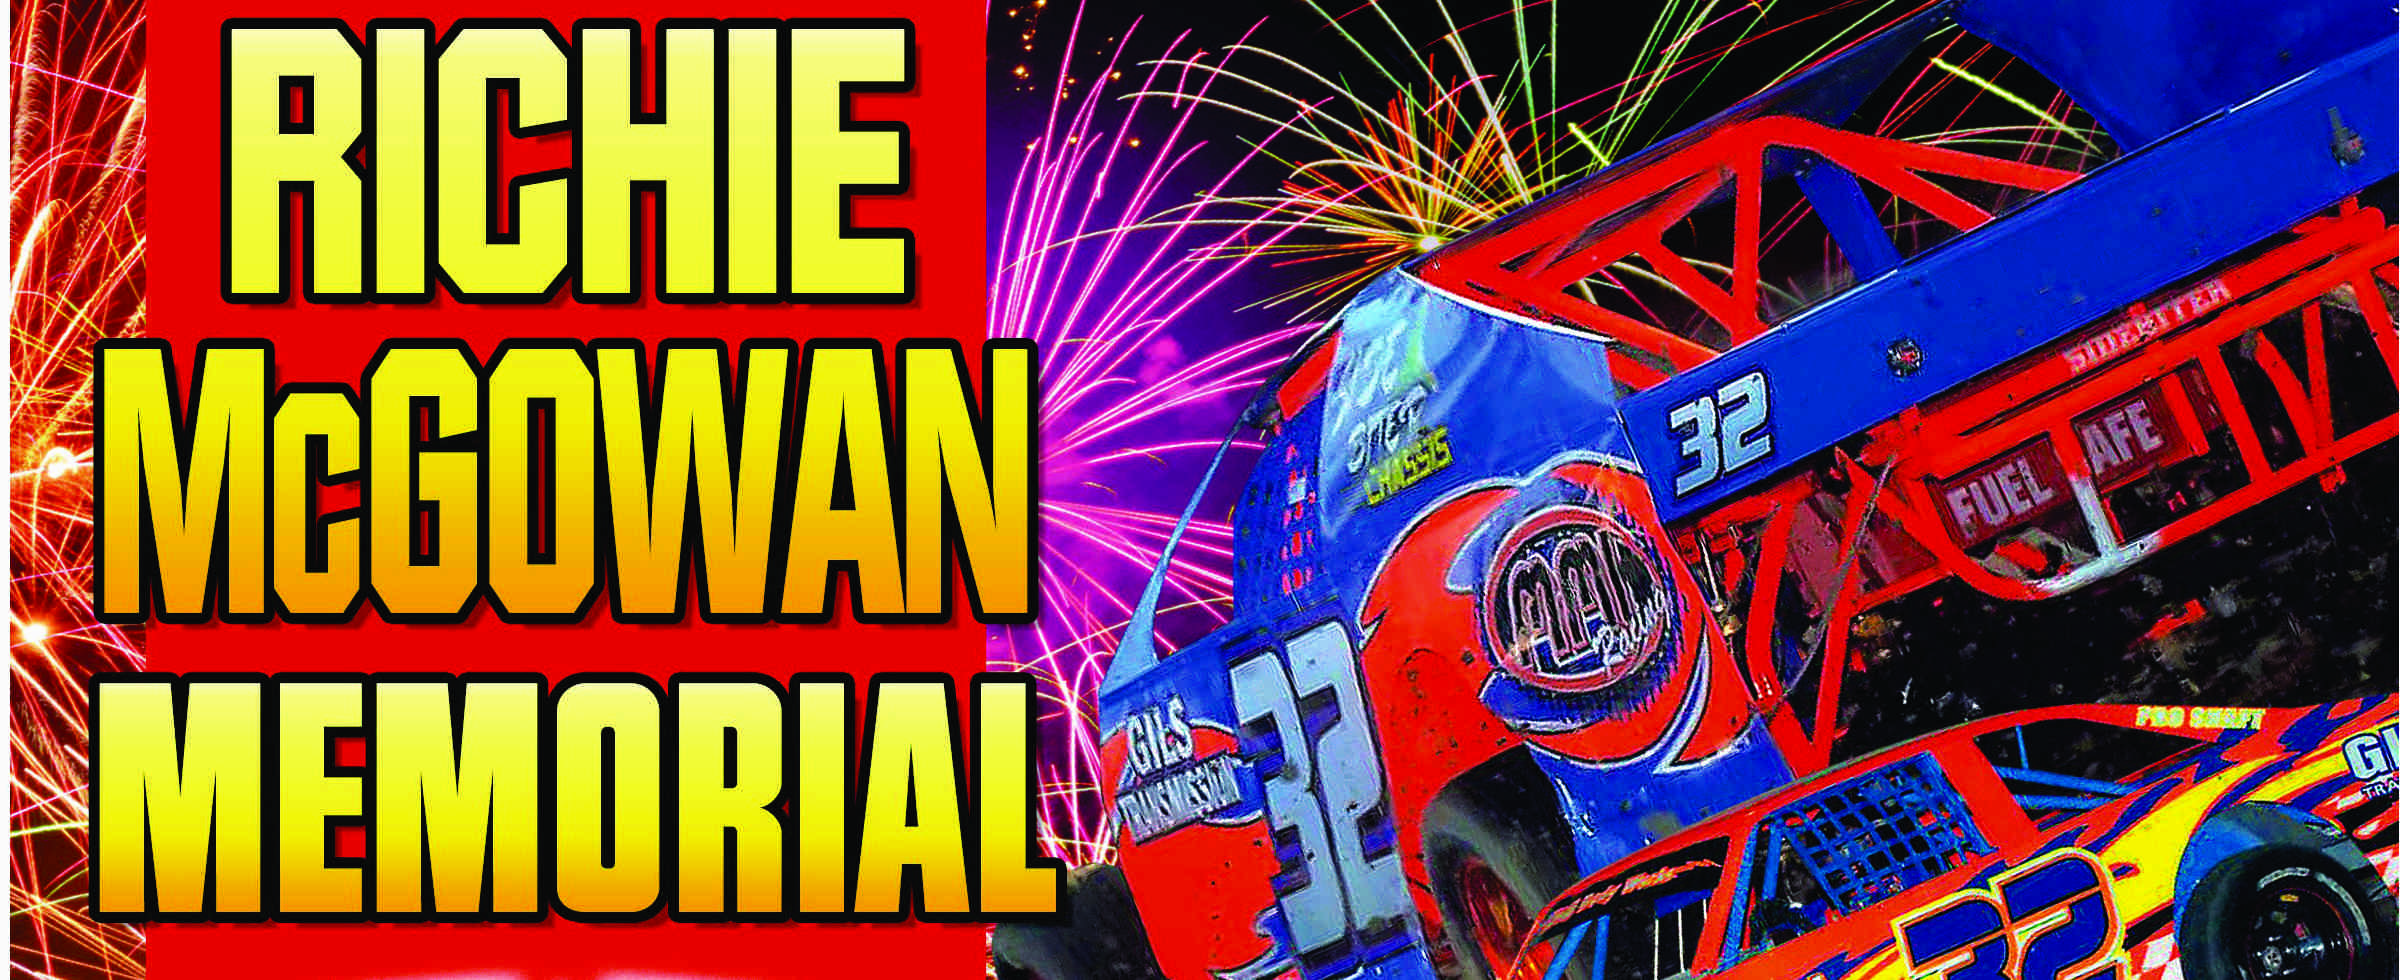 RICHIE McGOWAN MEMORIAL with FIREWORKS